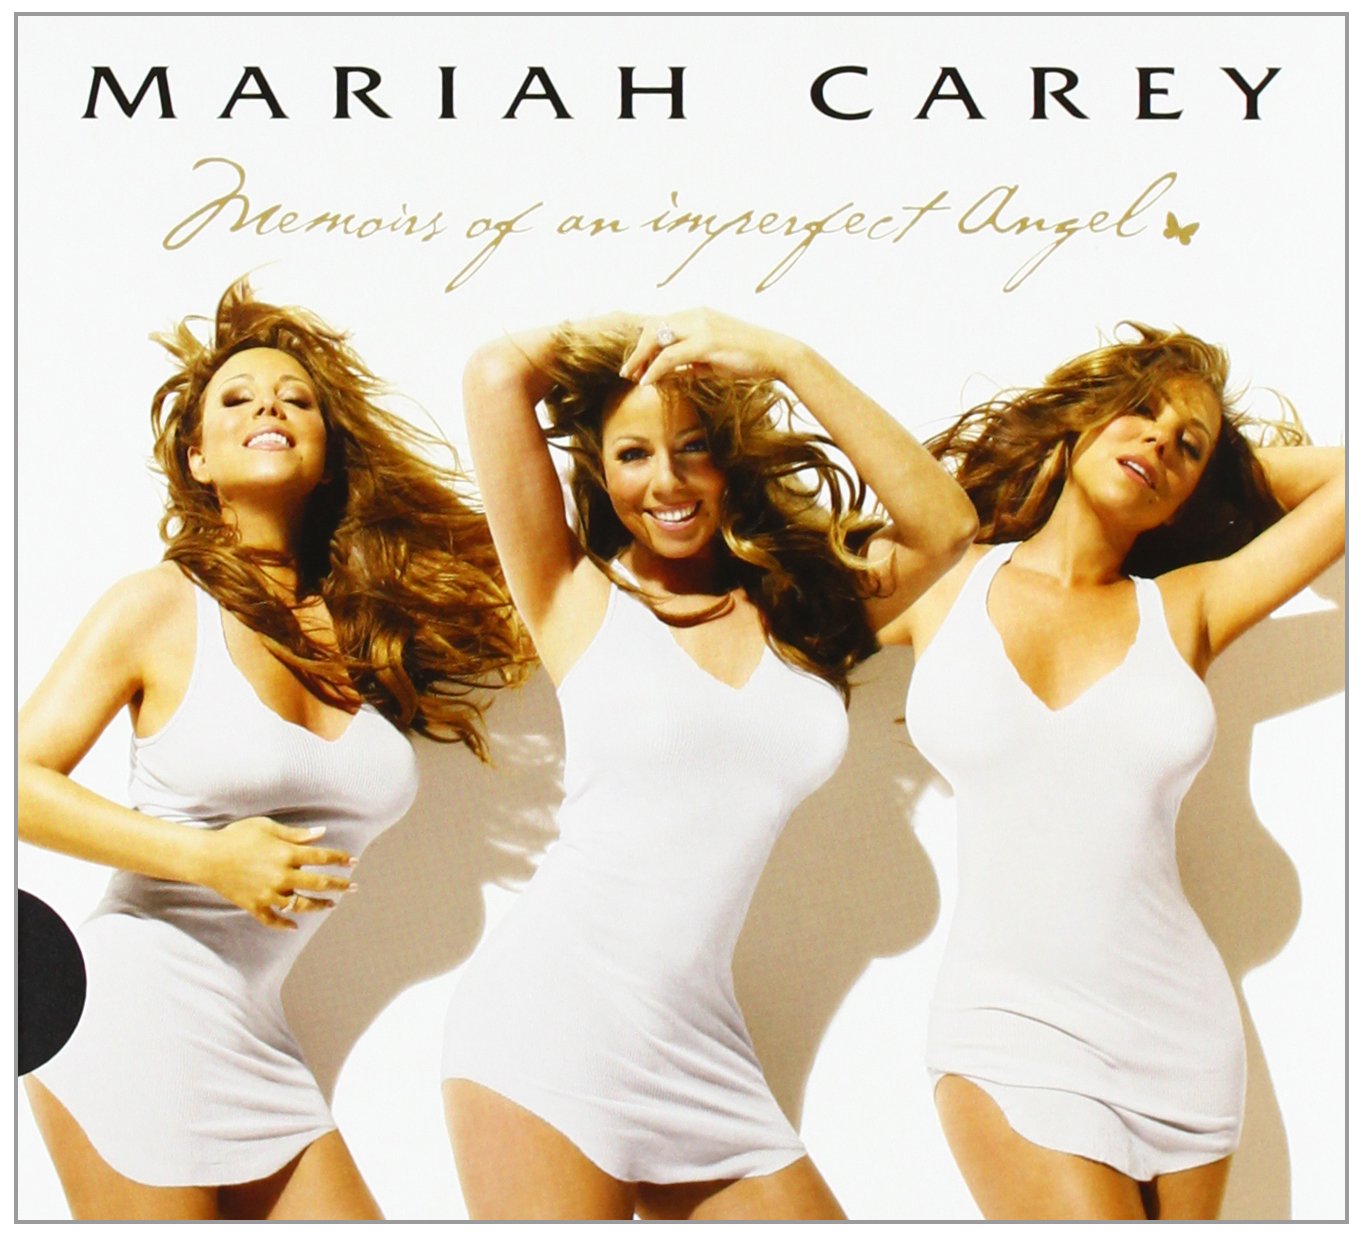 Cover of Mariah Carey's "Memoirs of an Imperfect Angel"